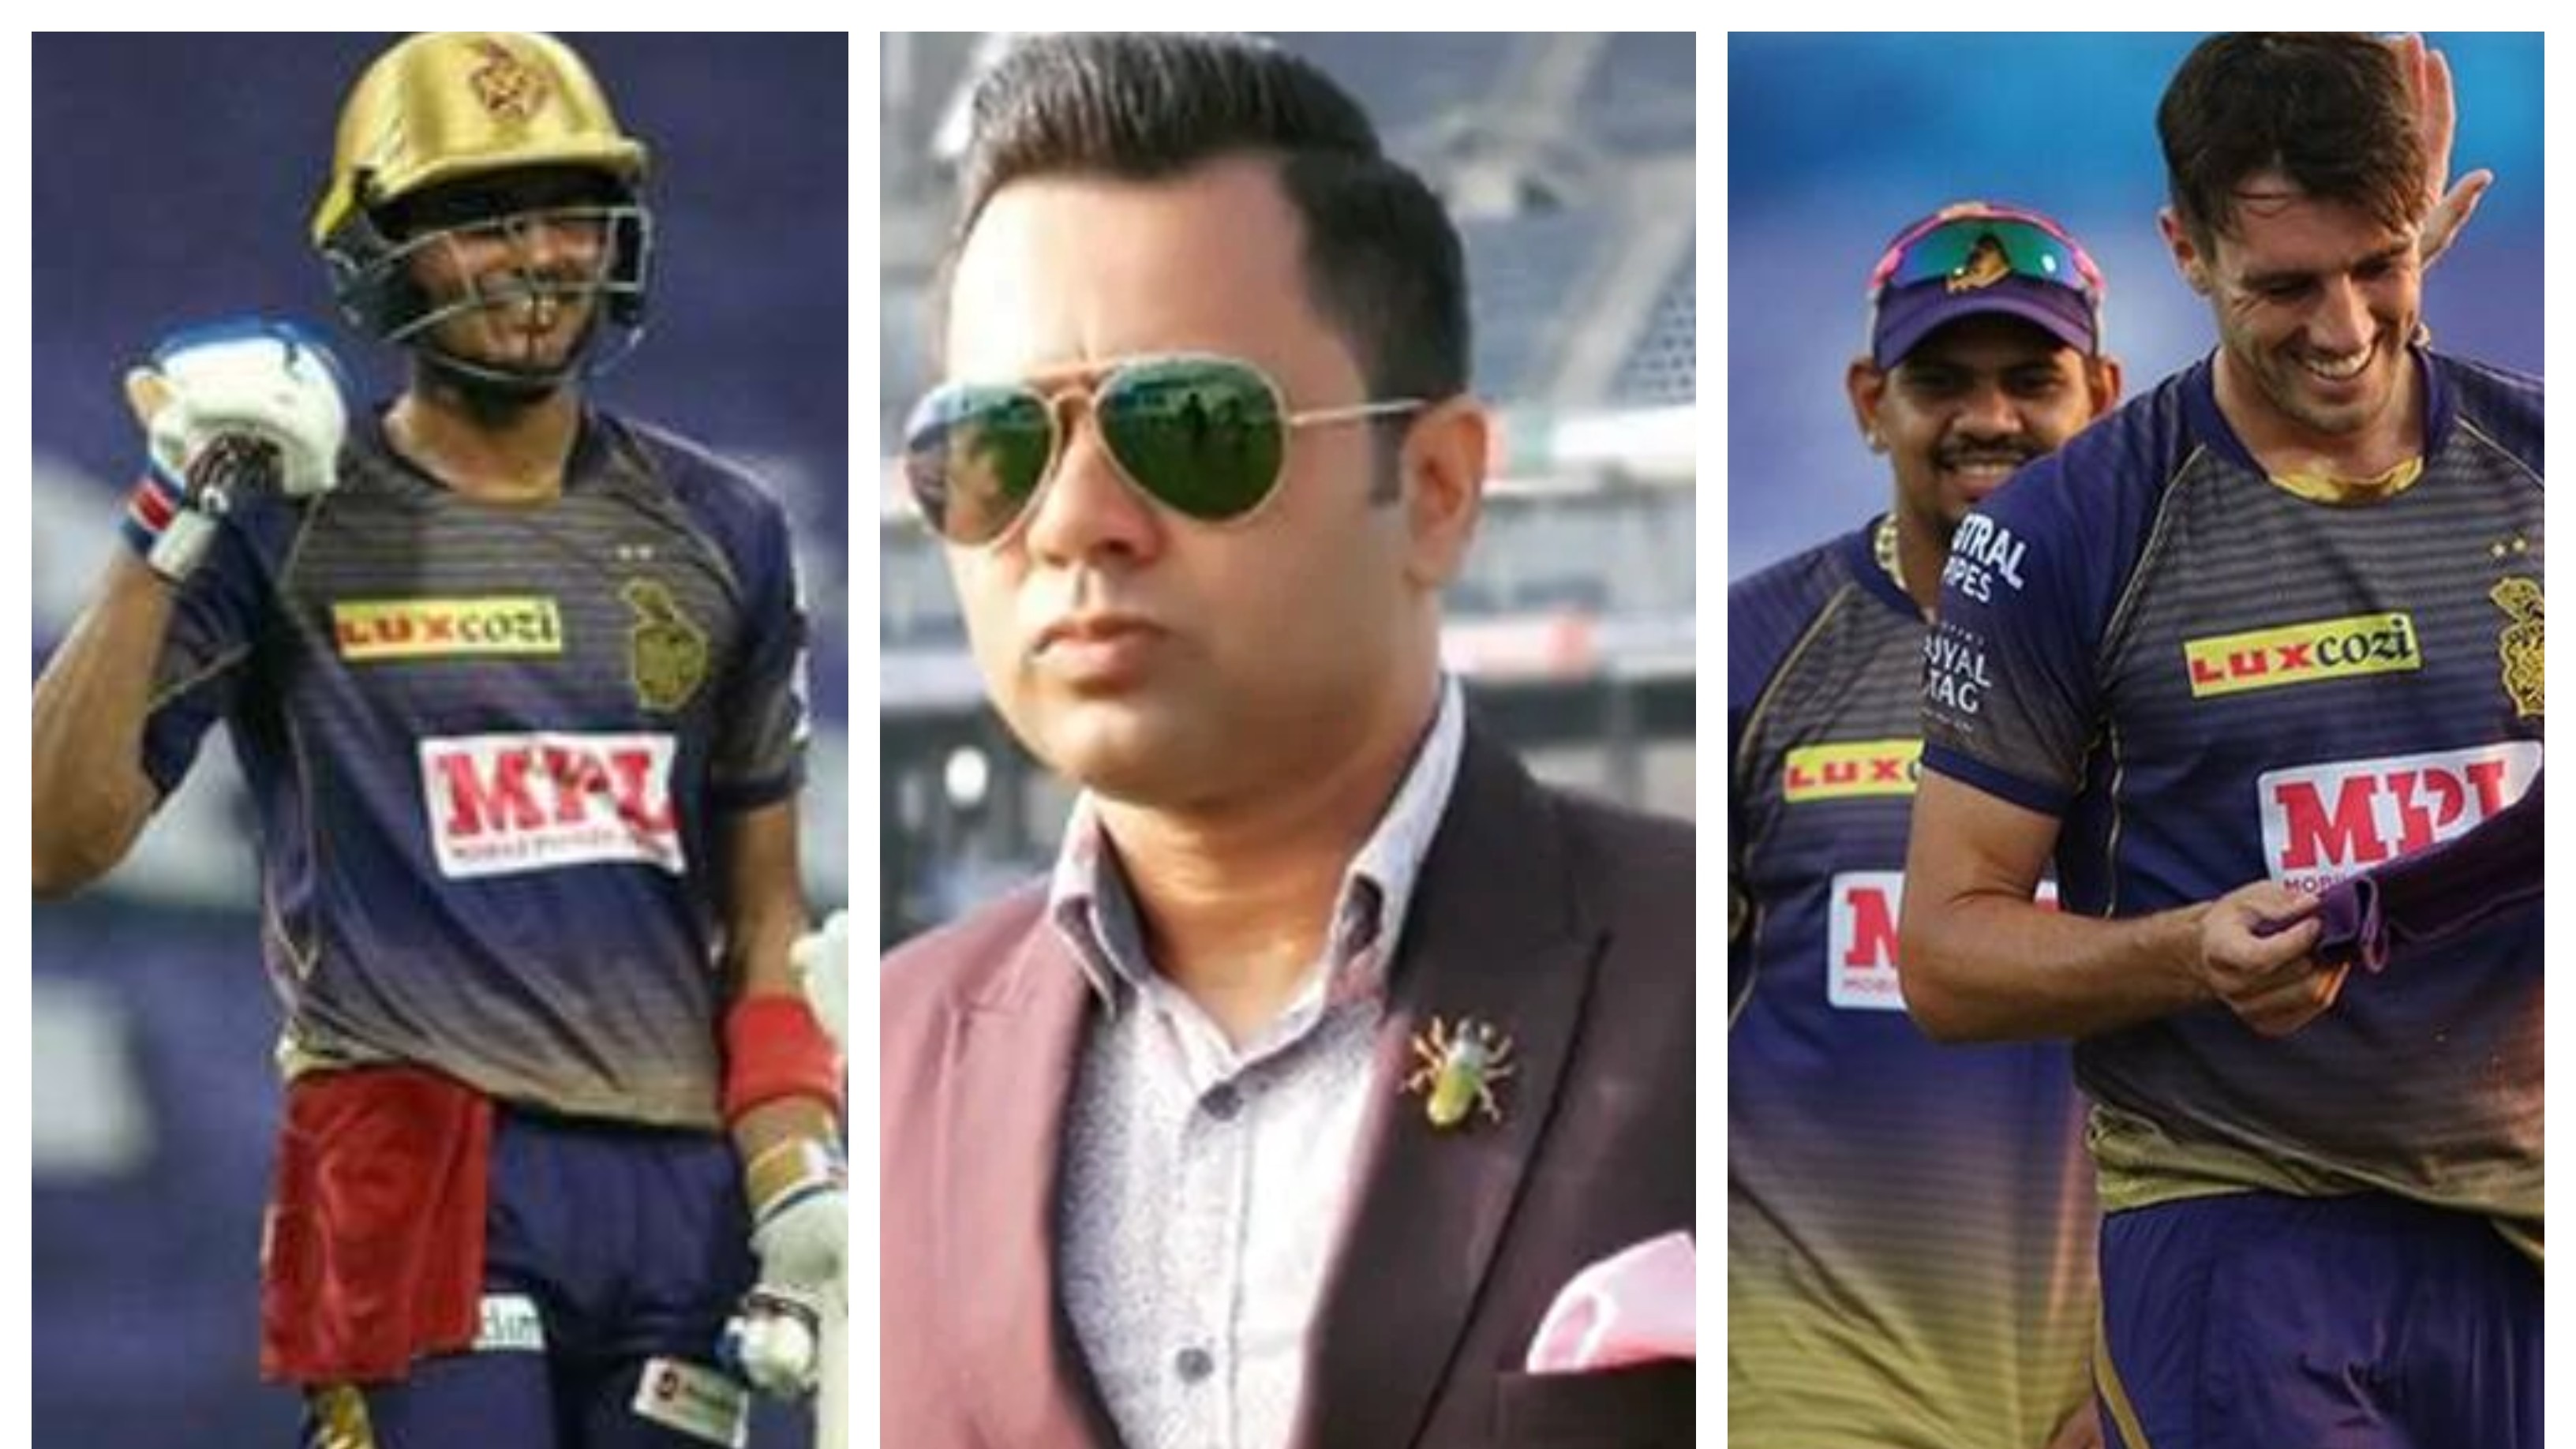 IPL 2020: Aakash Chopra suggests KKR to appoint Shubman Gill as captain, release Cummins and Narine